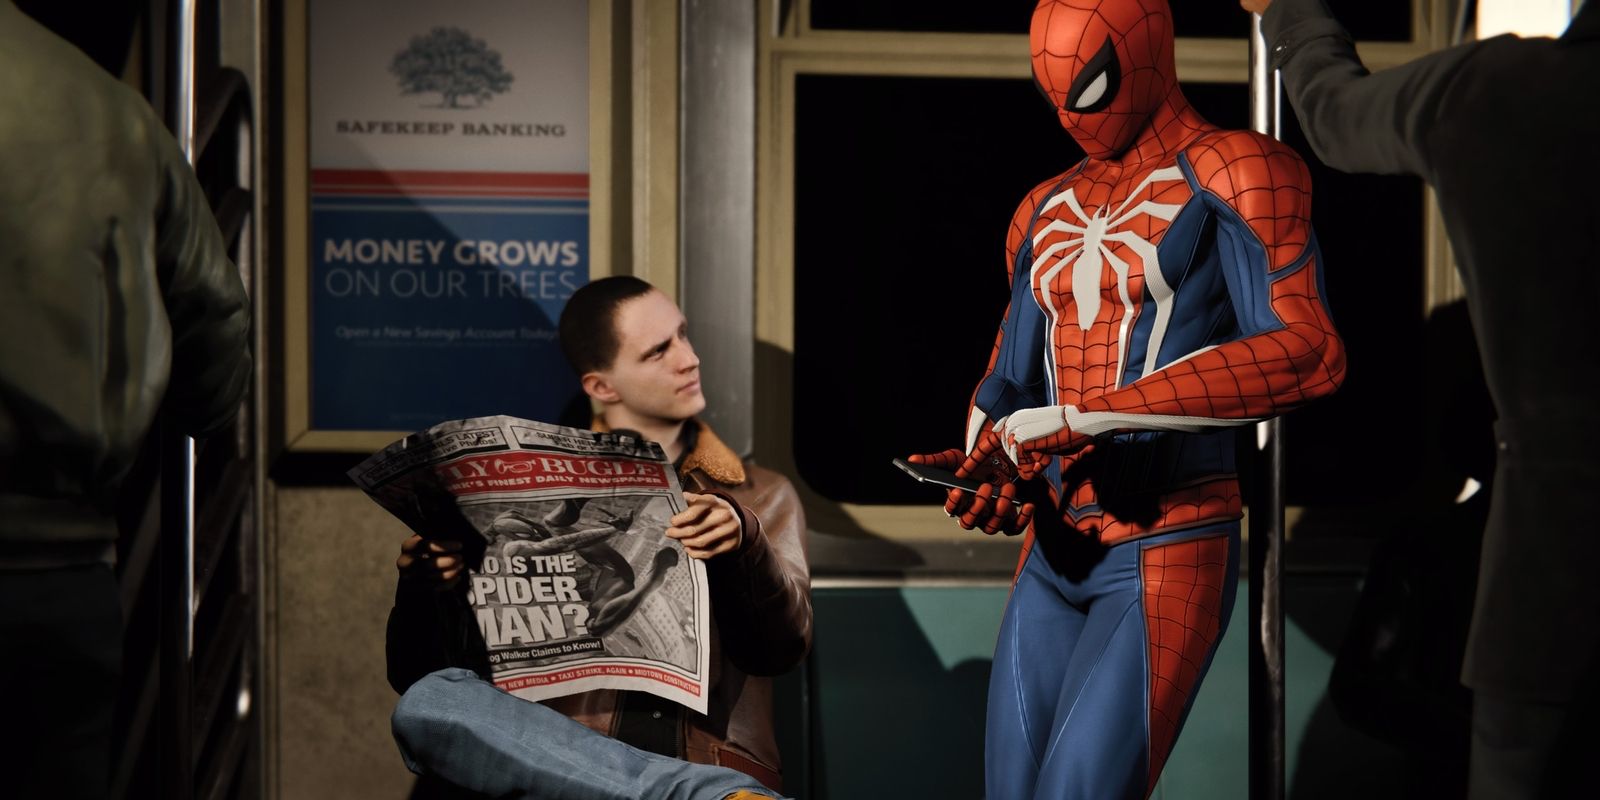 A loading screen from Marvel's Spider-Man, showing Peter in his suit riding the subway and playing on his cell phone next to another passenger looking confused and holding the Daily Bugle.